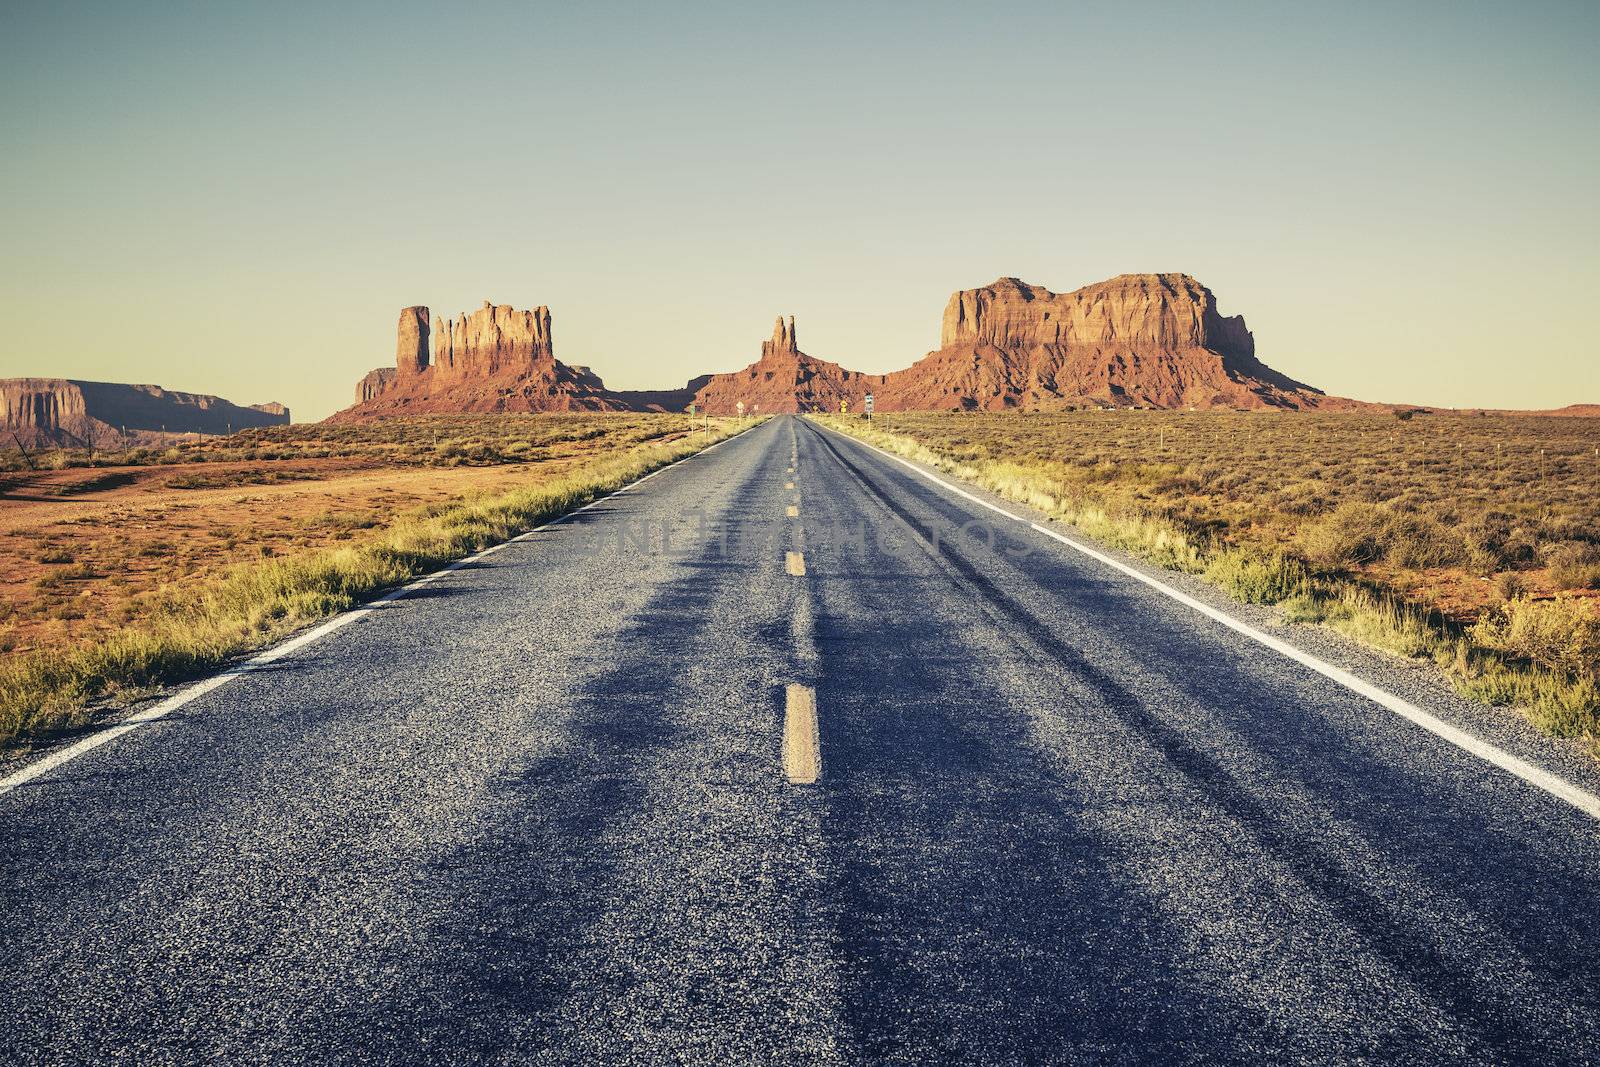 Long road to Monument Valley, USA 